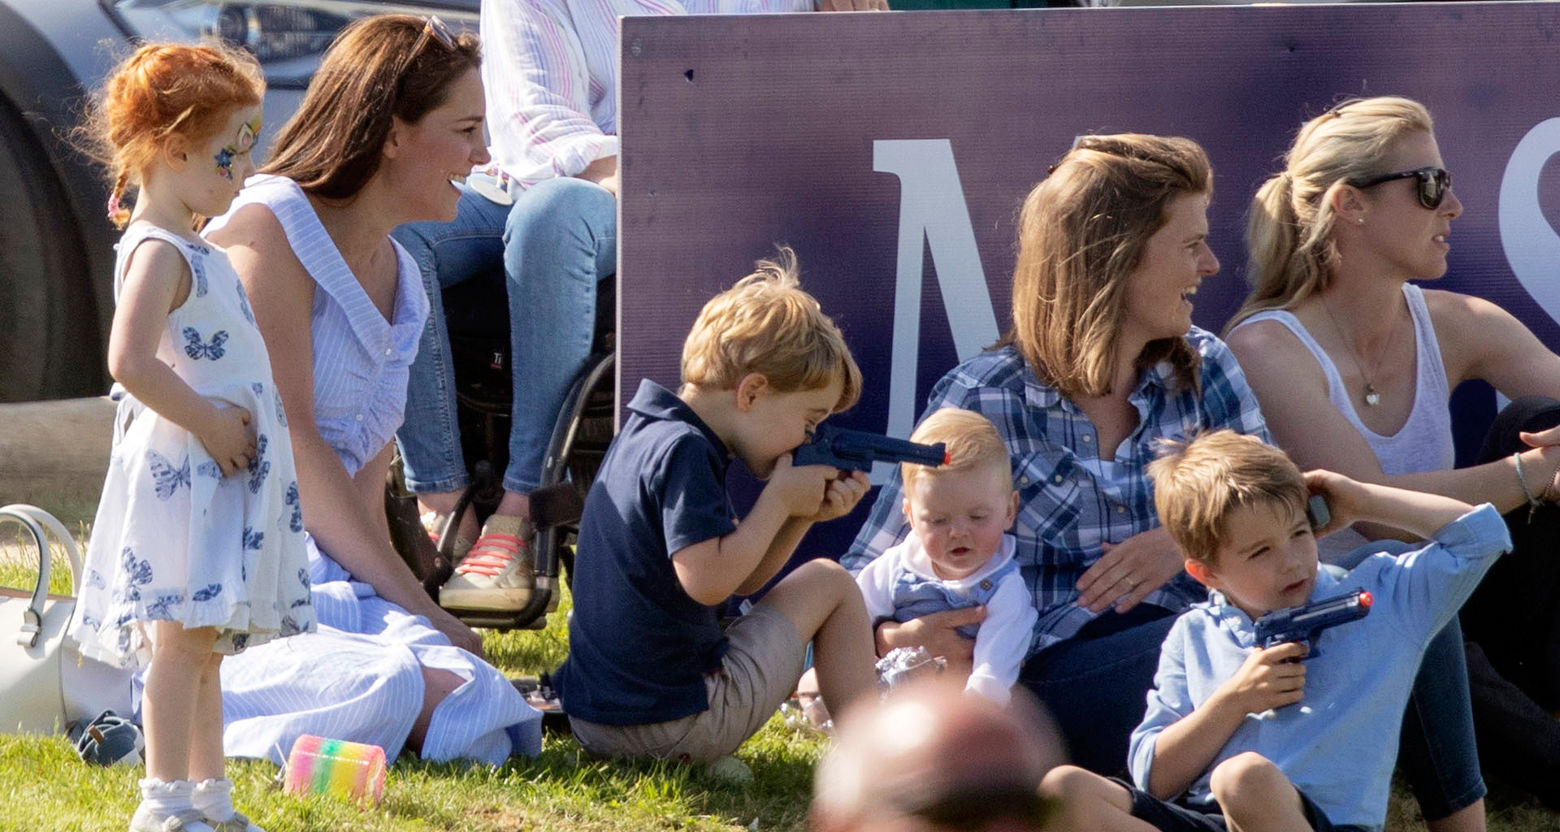 Britain's Kate, the Duchess of Cambridge, left, sits with Prince George and other unidentified spectators as they watch Prince William take part in the Maserati Royal Charity Polo Trophy at the Beaufort Polo Club, in Tetbury, England, Sunday June 10, 2018. (Steve Parsons/PA via AP)